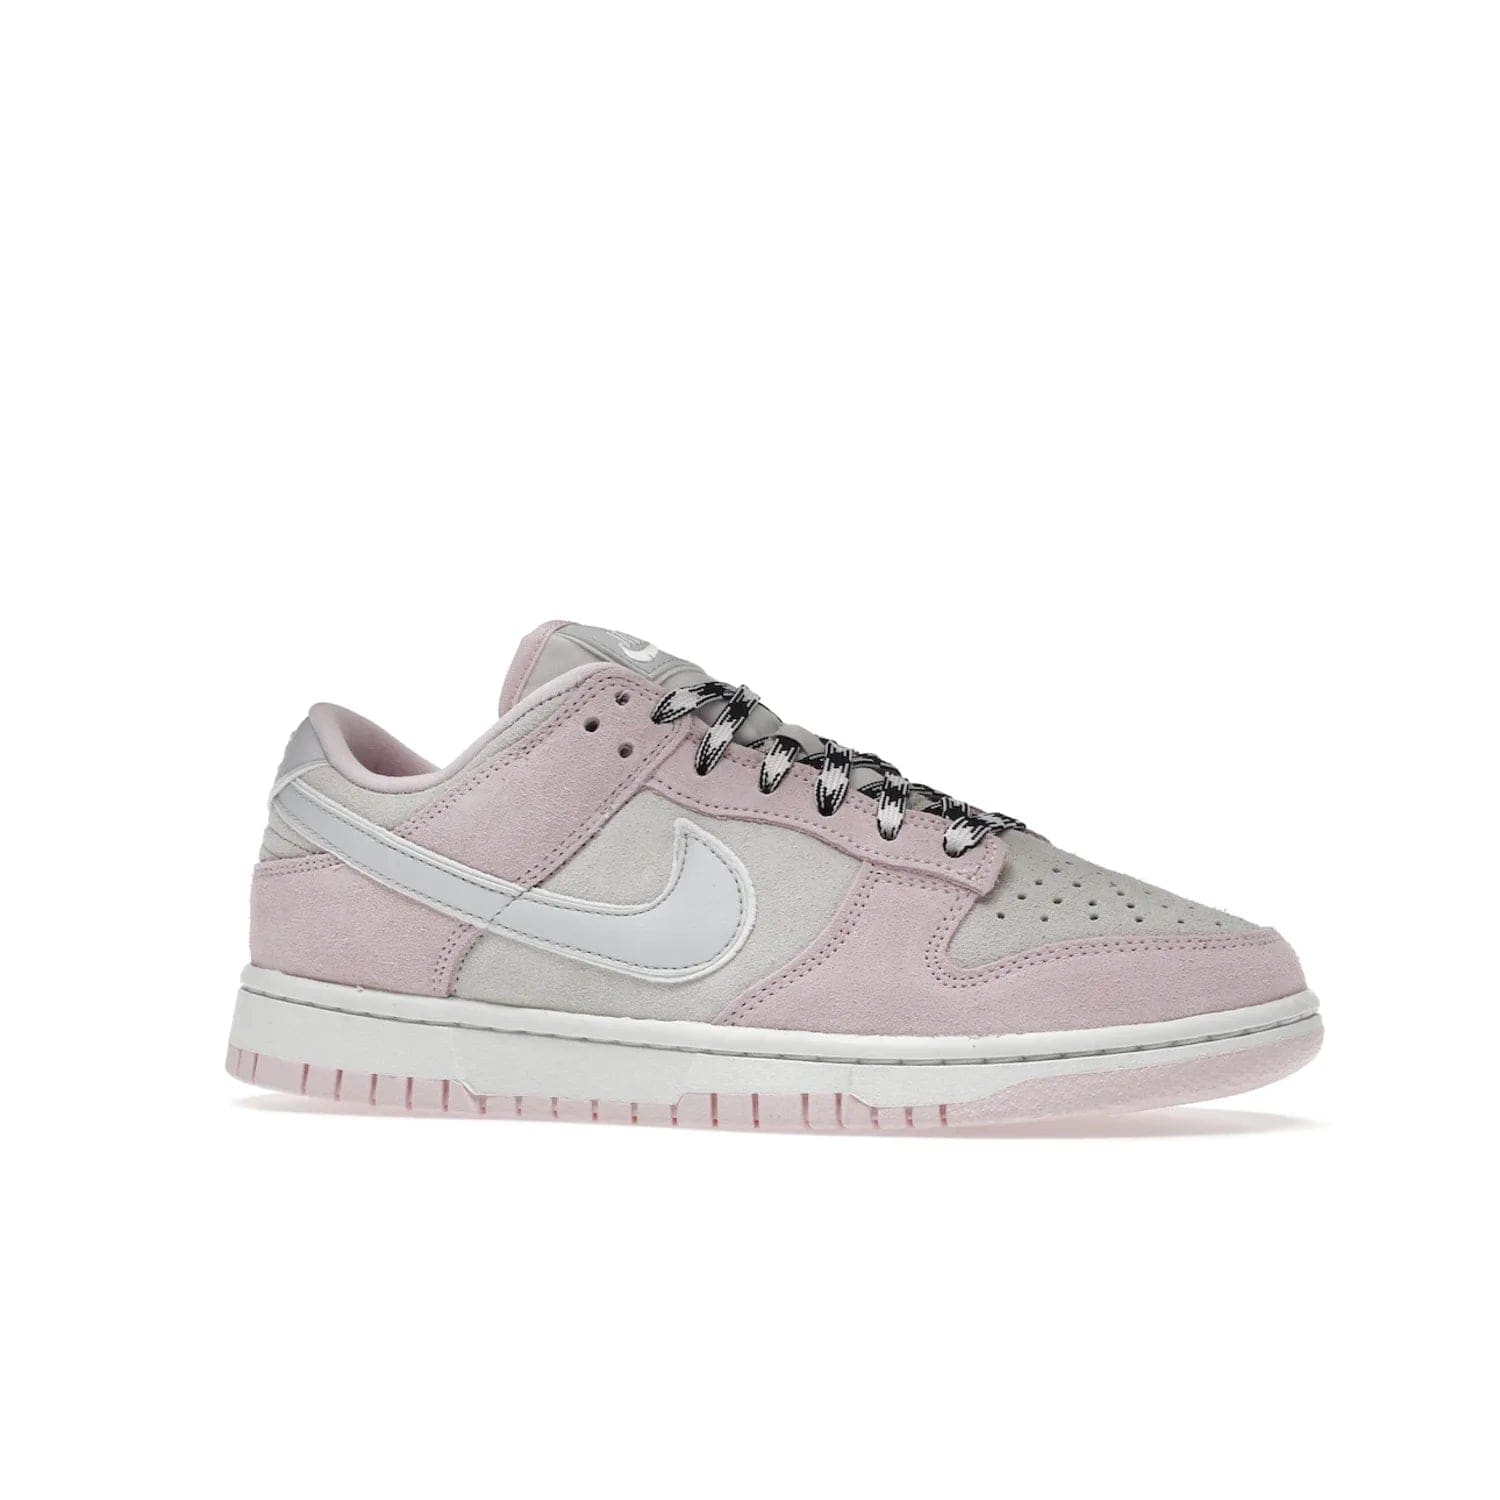 Nike Dunk Low LX Pink Foam (Women's) - Image 3 - Only at www.BallersClubKickz.com - Feminine & fashionable Nike Dunk Low LX Pink Foam W sneaker. Featuring leather and synthetic materials and durable rubber sole. Lace-up design ensures a snug fit. Released Dec. 10th 2022, $120. Stylish and comfortable.